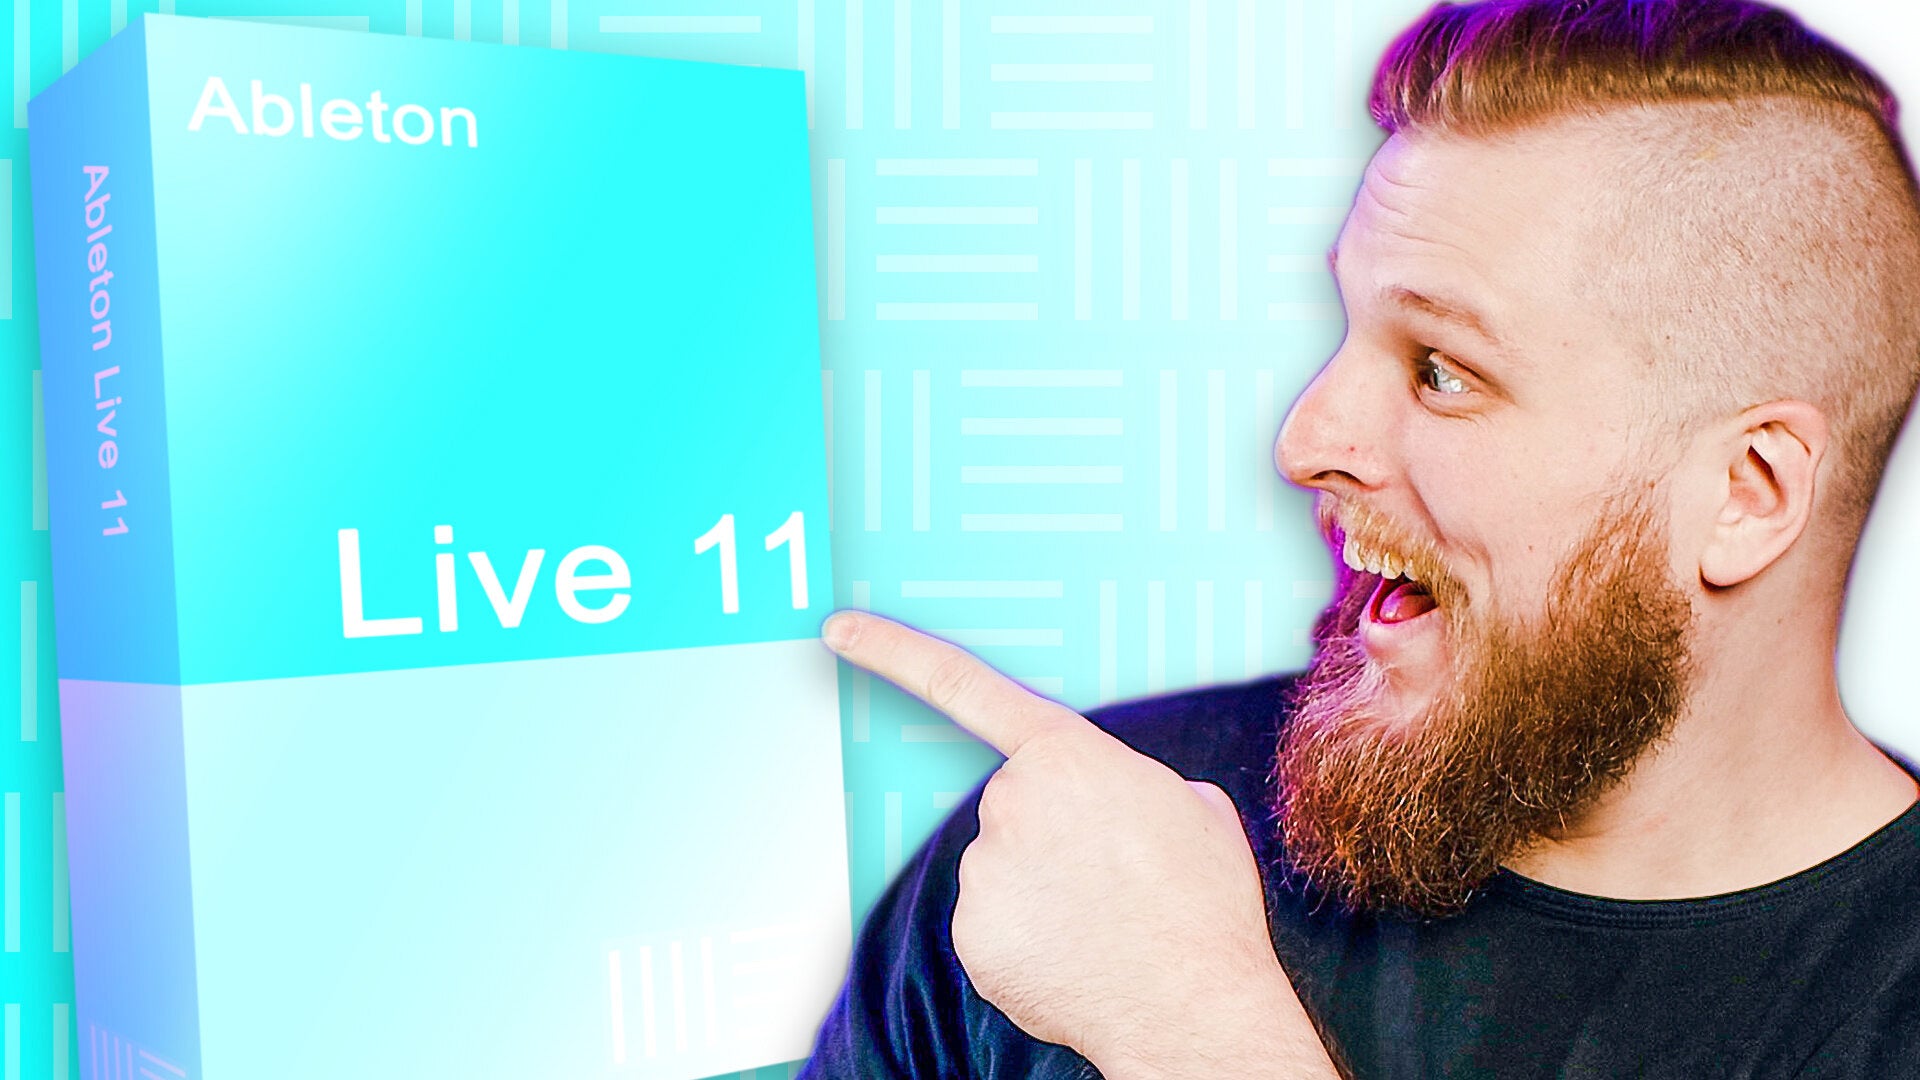 Ableton Live 11 - What's New?